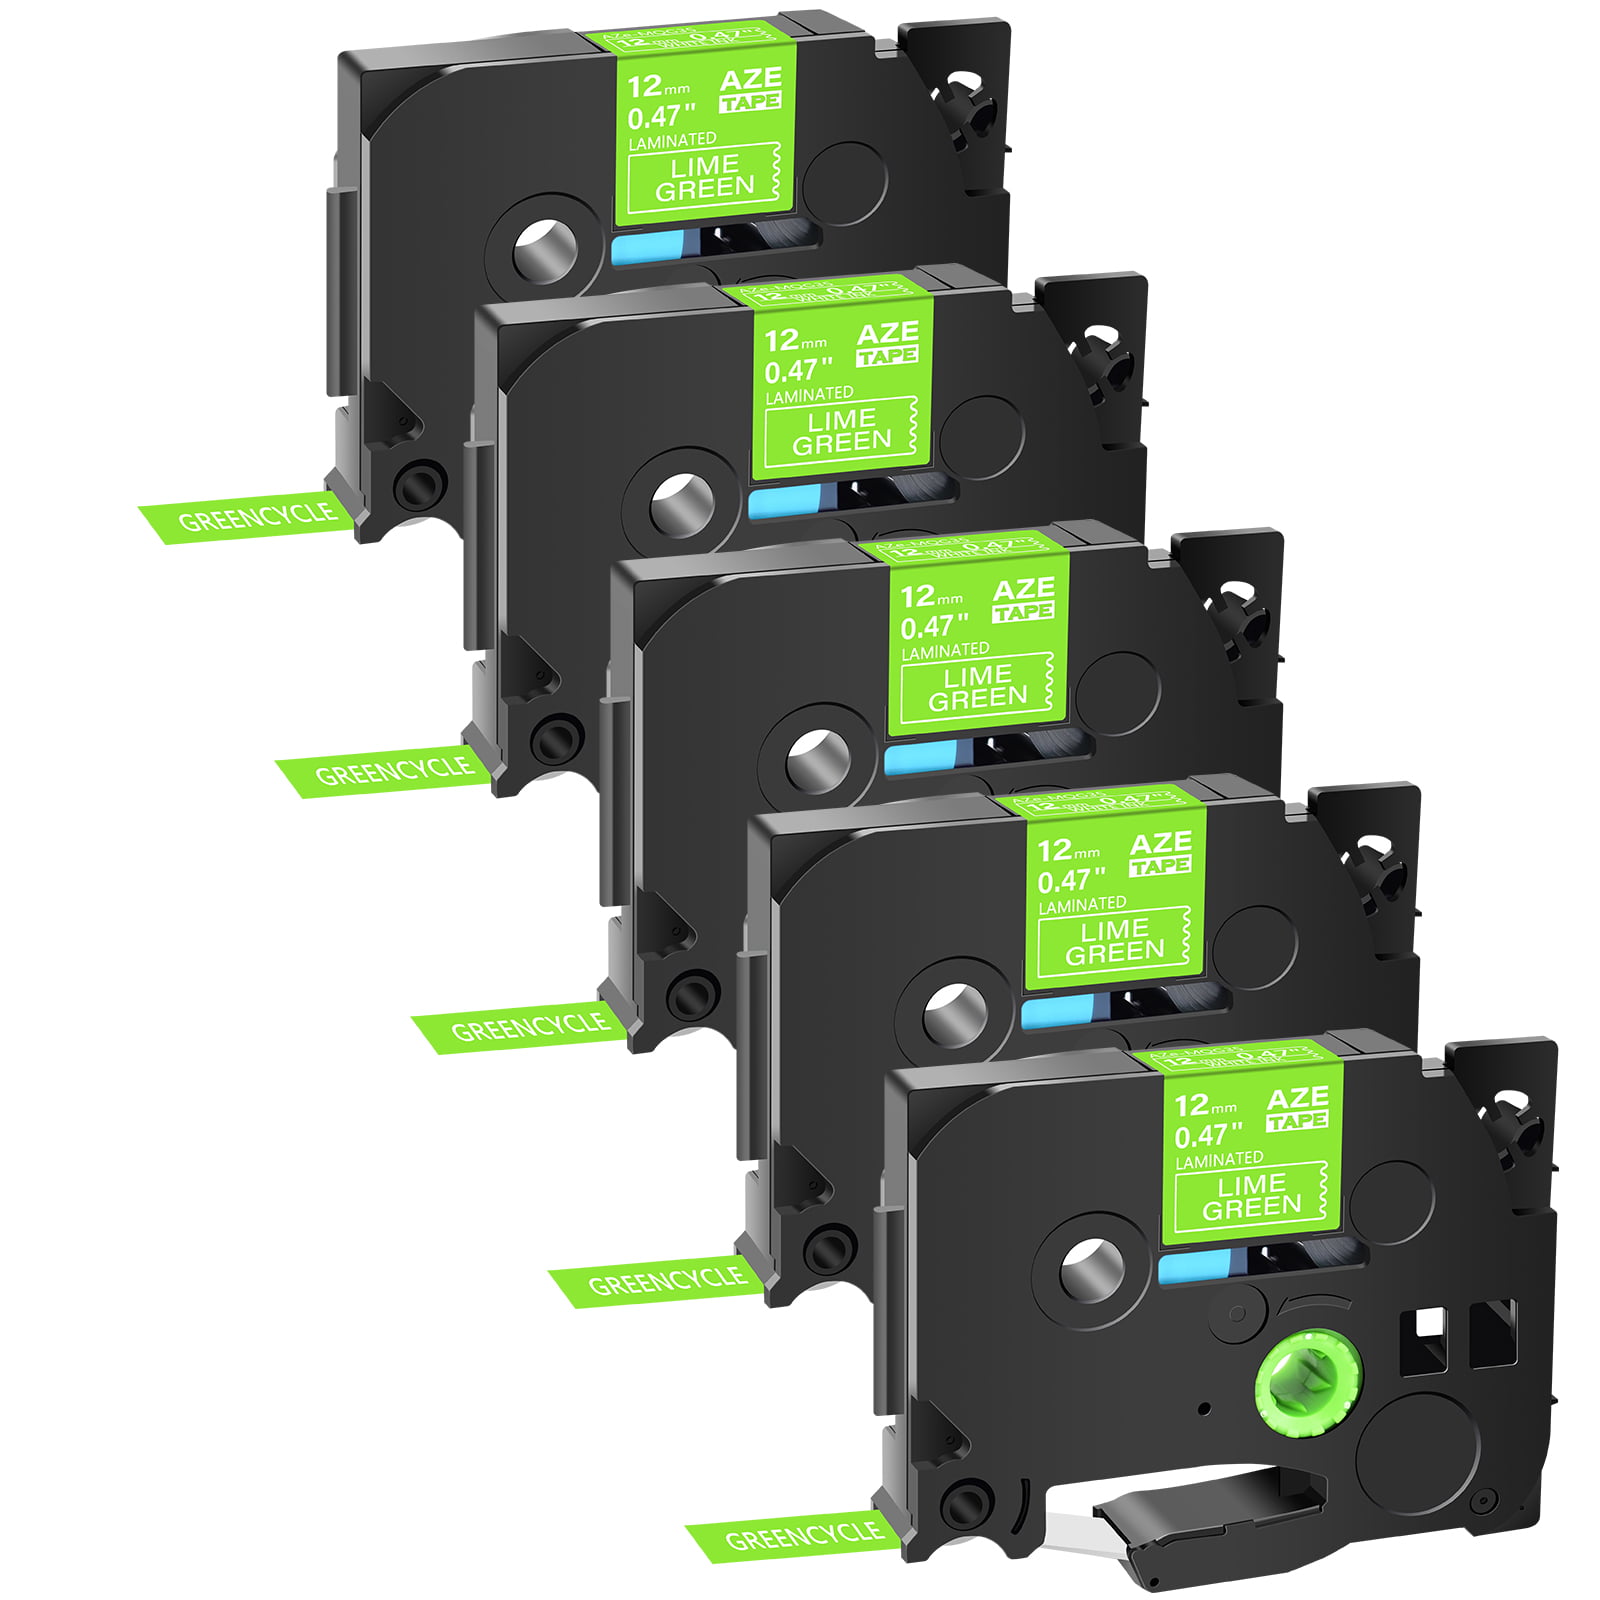 5 Pack TZe-MQG35 White on Lime Green Label Tape For Brother P-Touch PT-1880 1/2" 